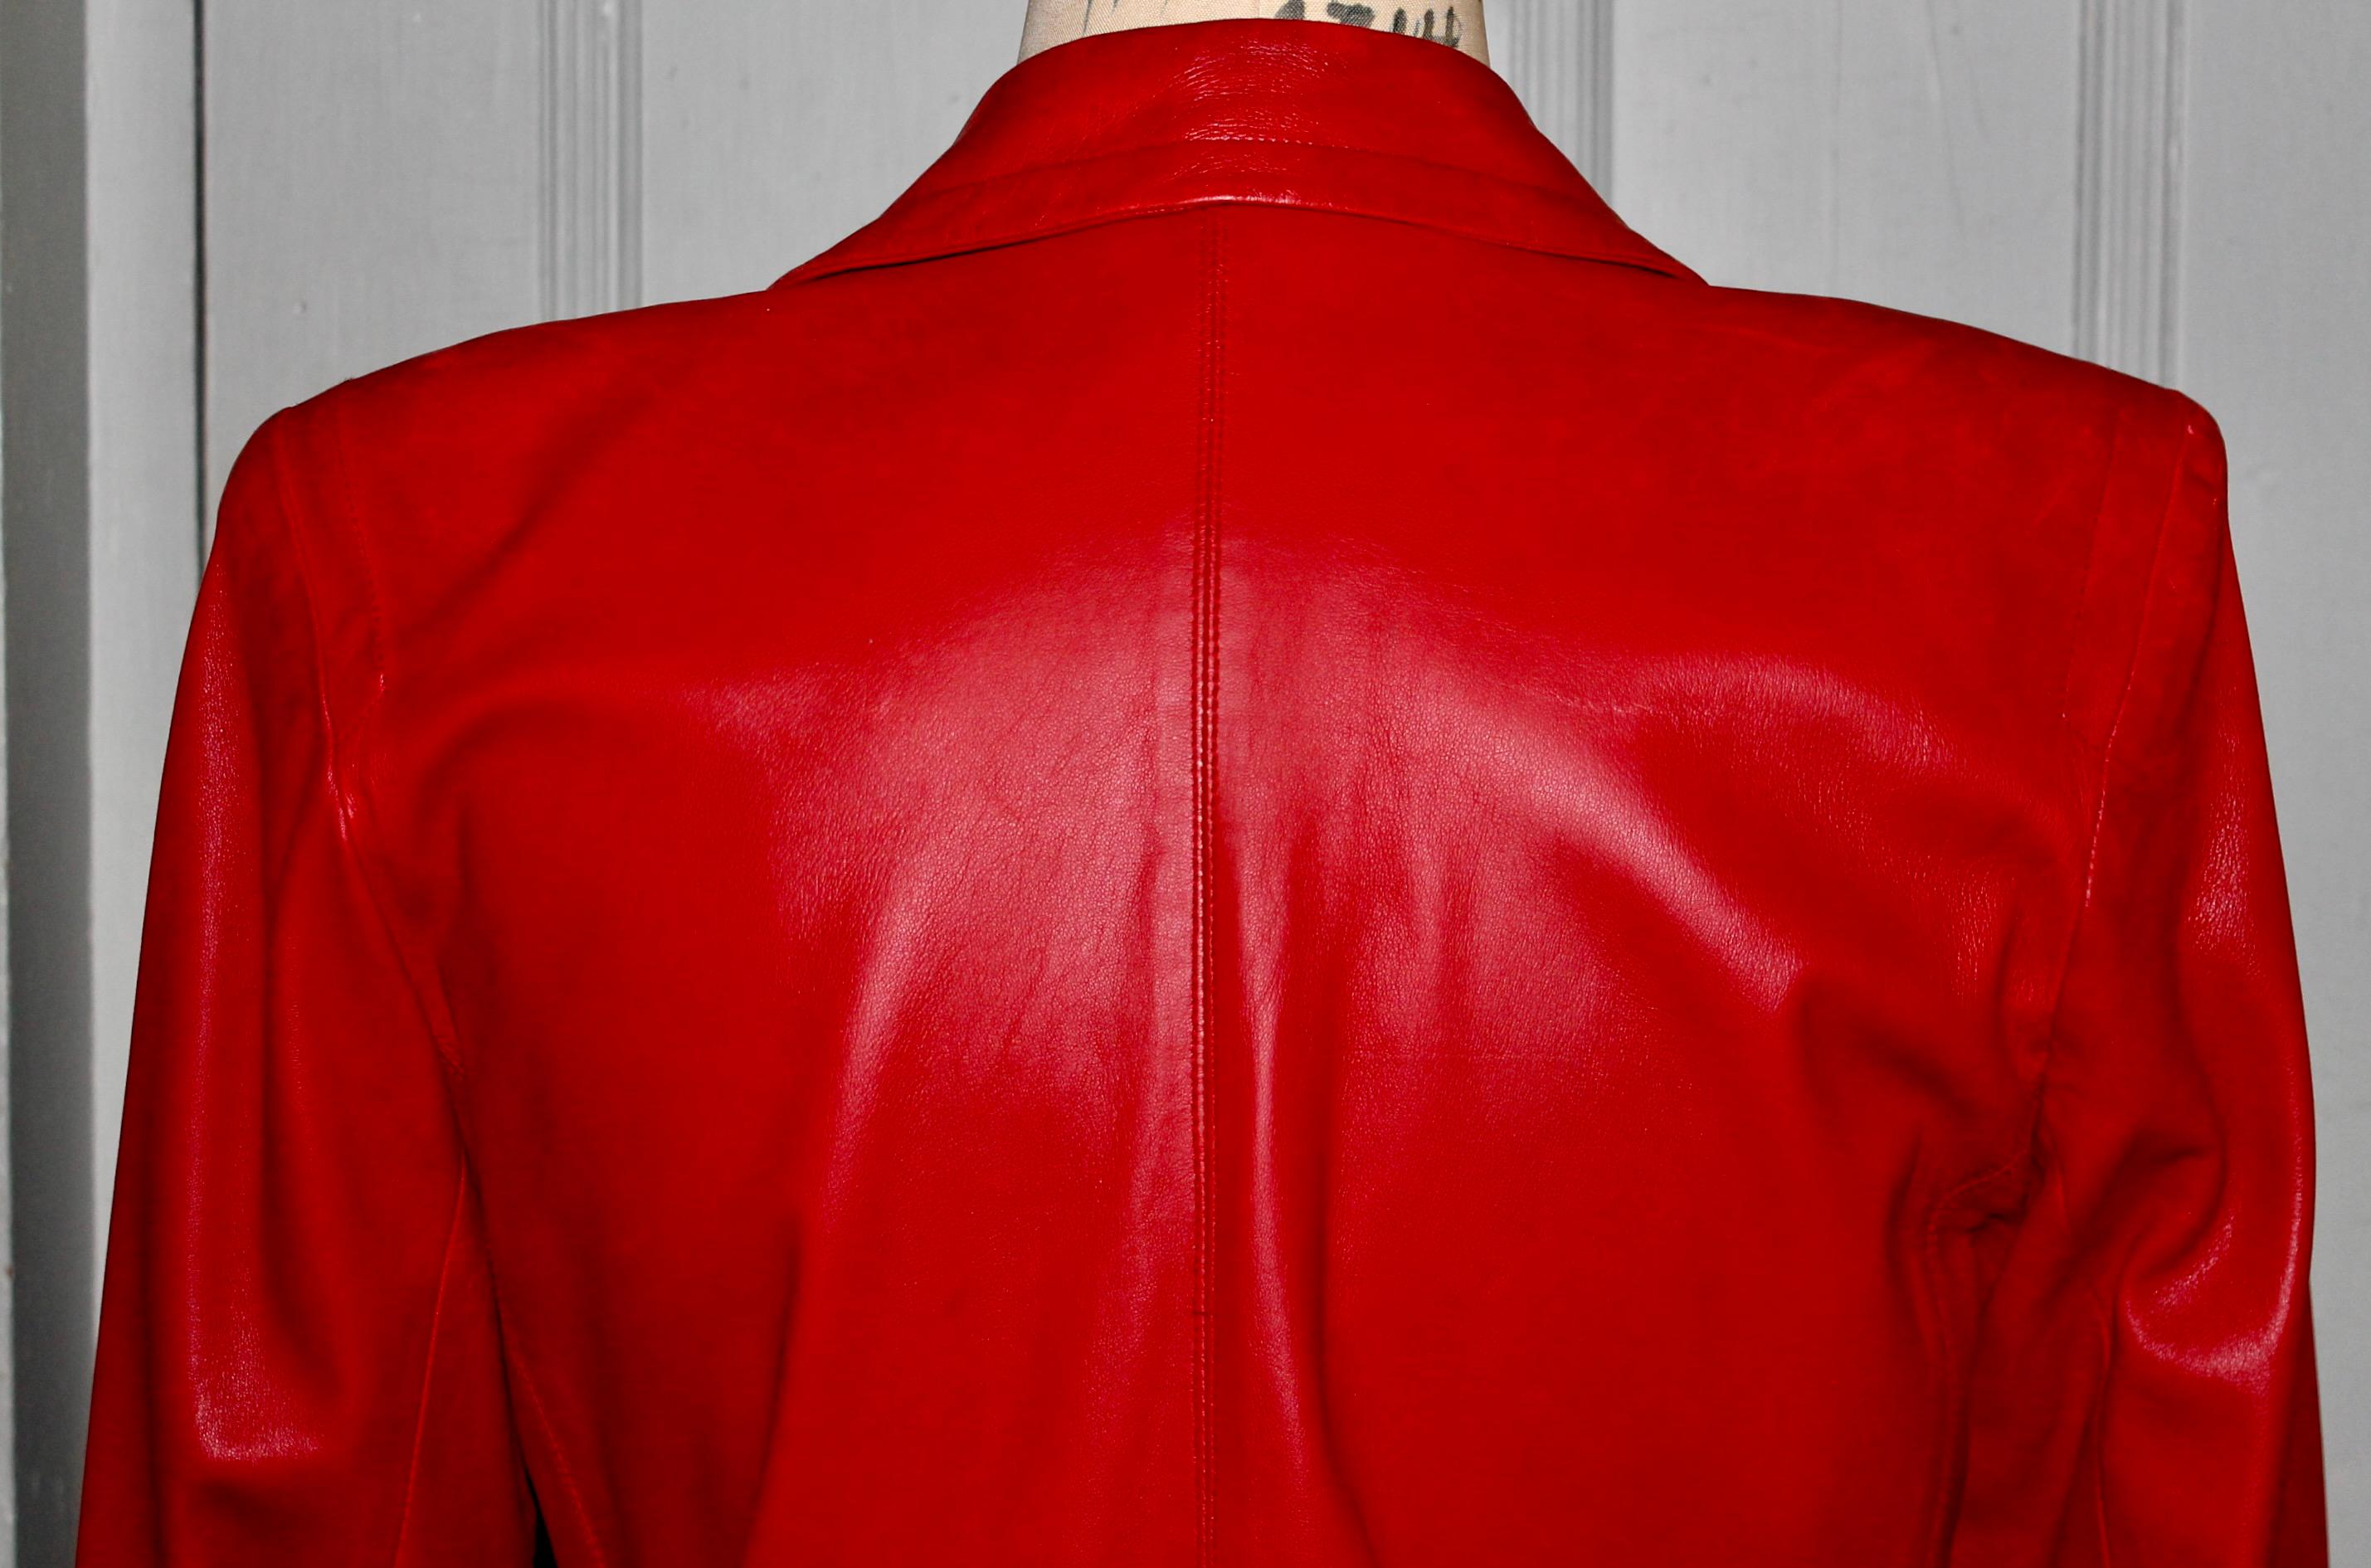 YSL Yves Saint Laurent Red Leather Suit In Excellent Condition For Sale In Sharon, CT